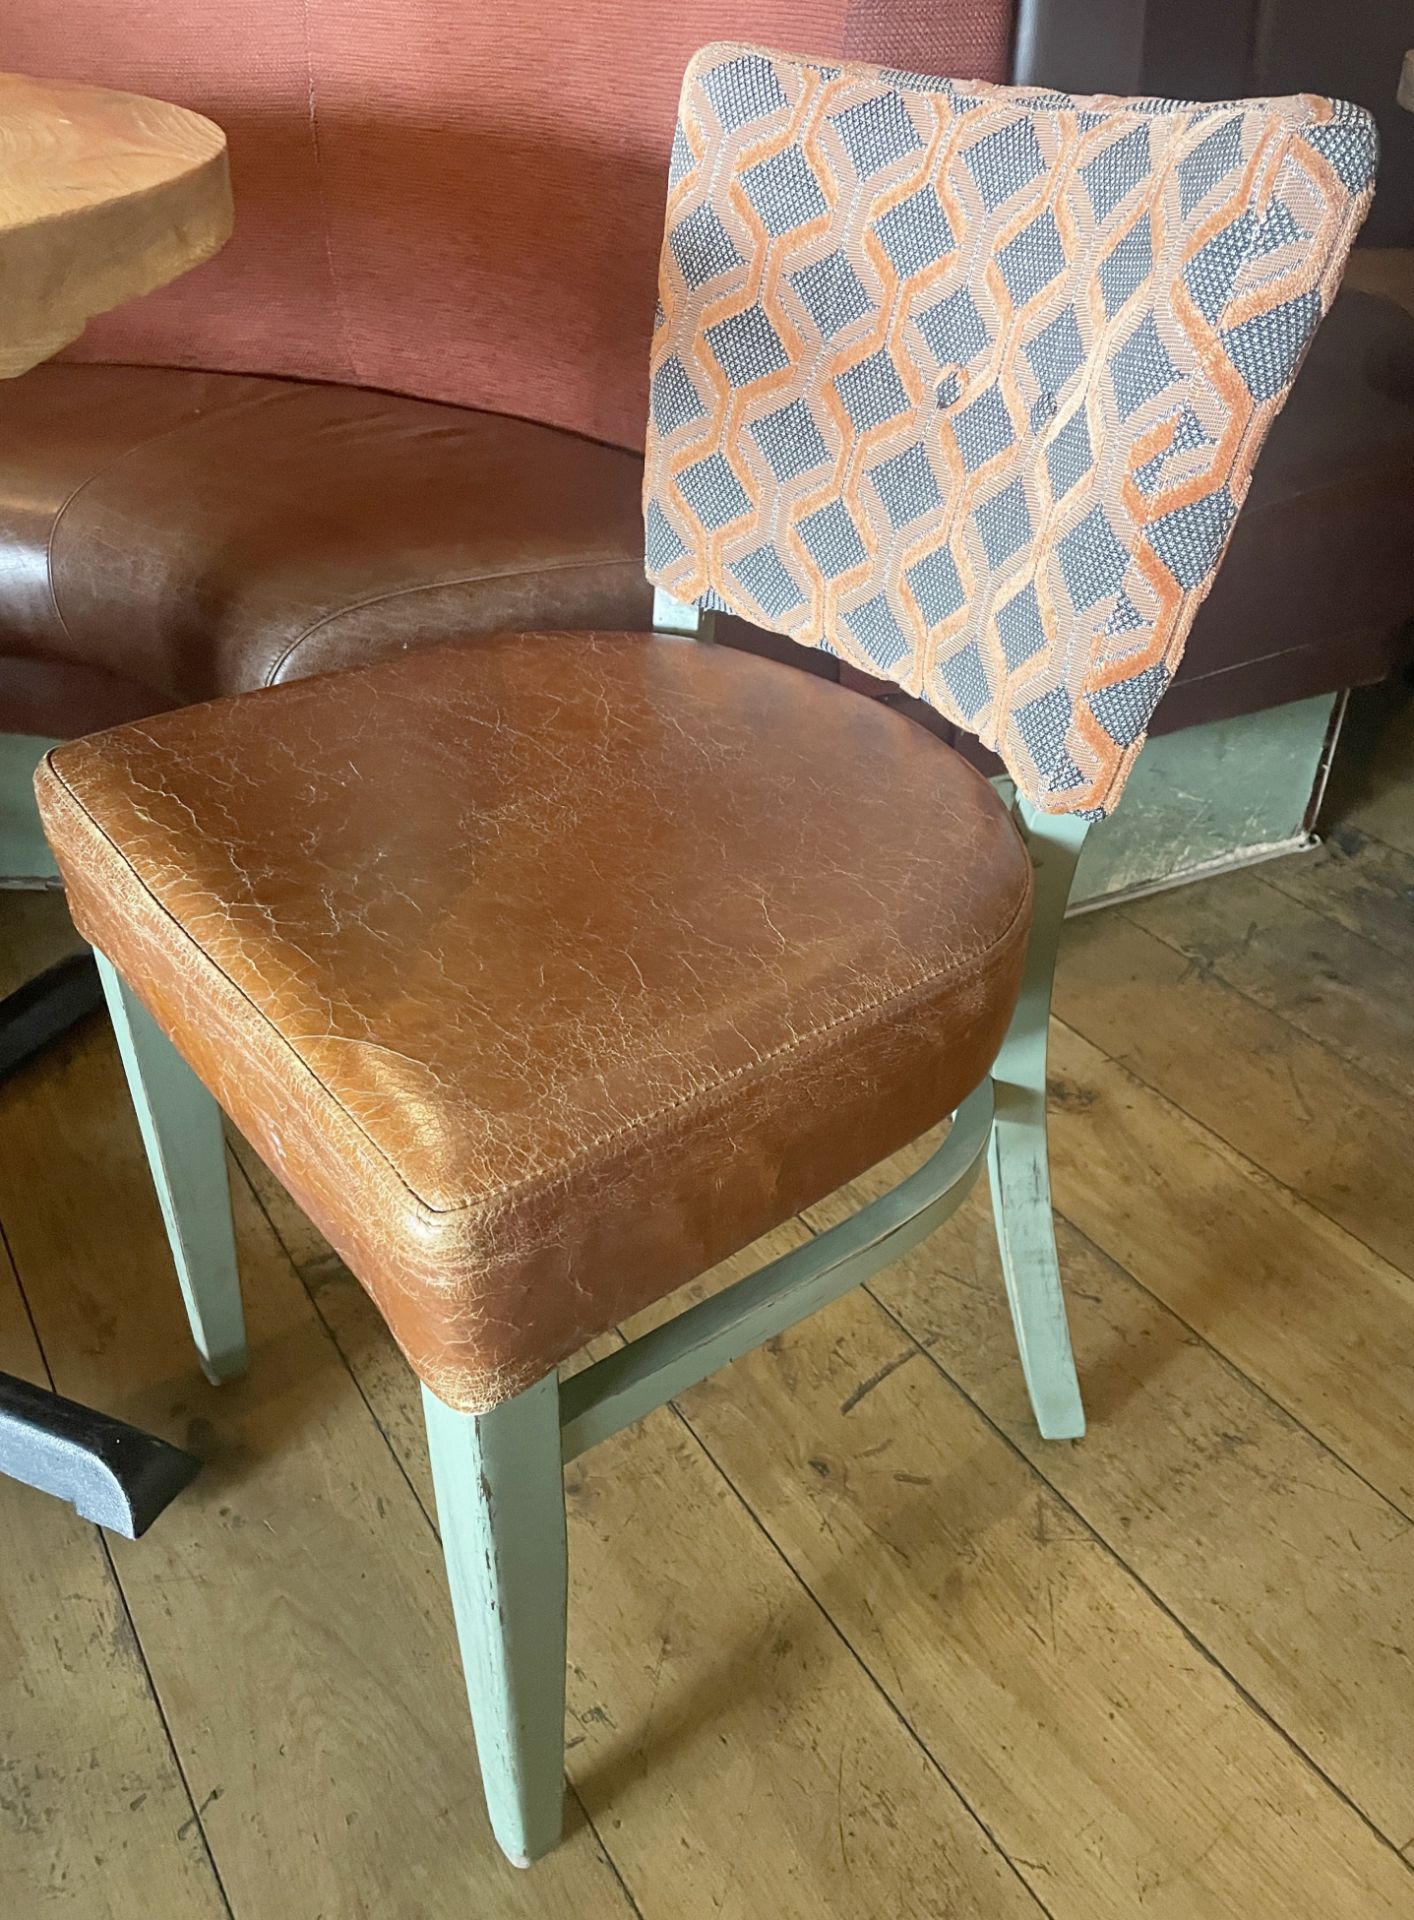 8 x Commercial Restaurant Dining Chairs Featuring Tan Leather Seats, Upholstered Back Rests and - Image 2 of 9